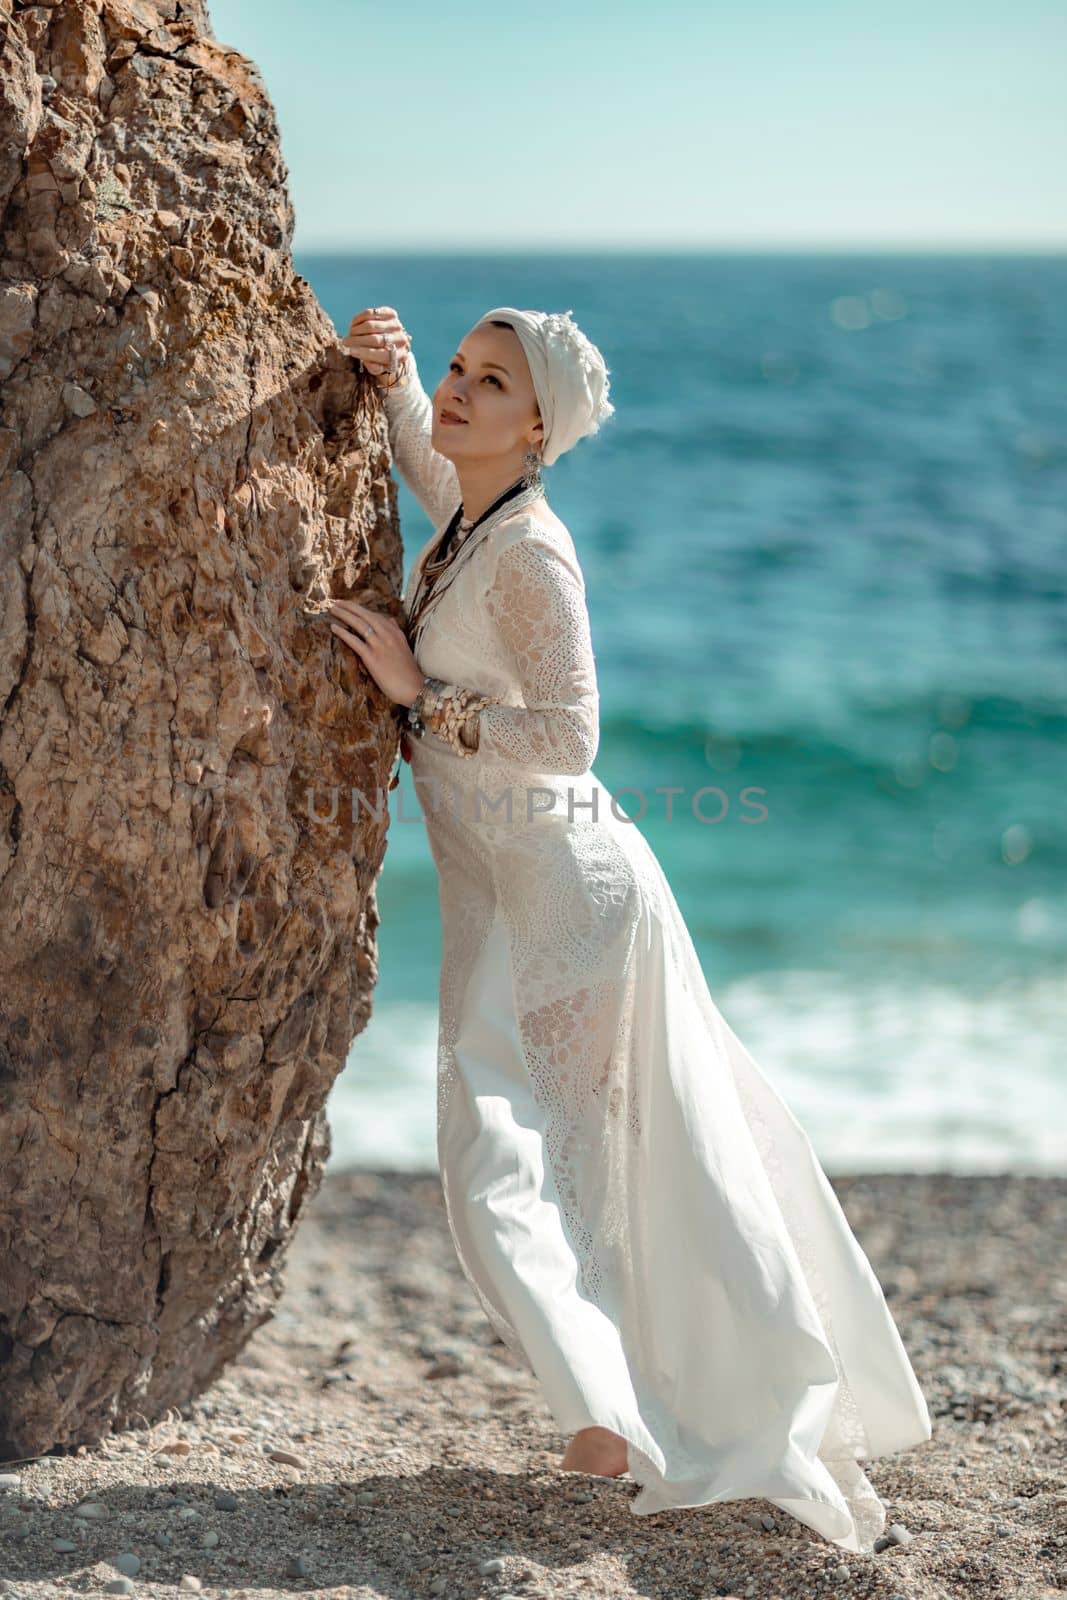 Woman white dress sea stones rocks.Middle-aged woman looks good with blond hair, boho style in a white long dress on beach jewelry around her neck and arms. by Matiunina